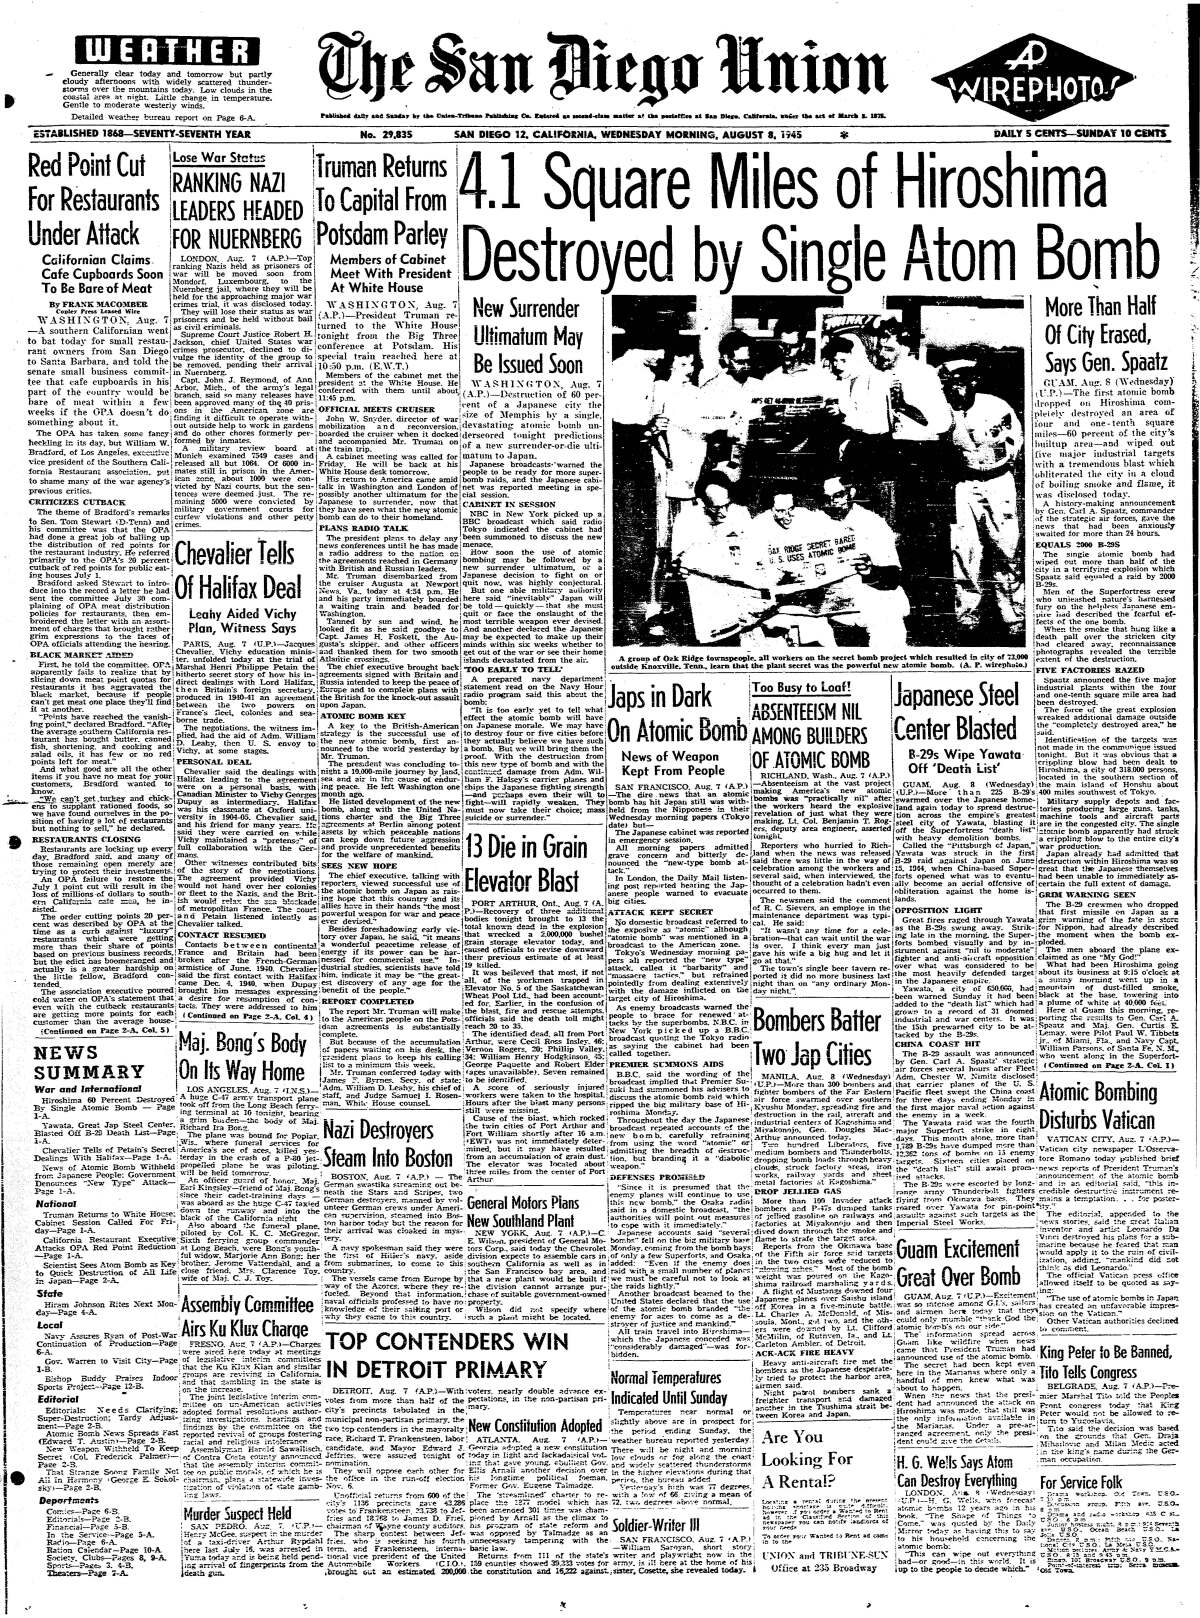 August 8, 1945 Union front page with Hiroshima headline